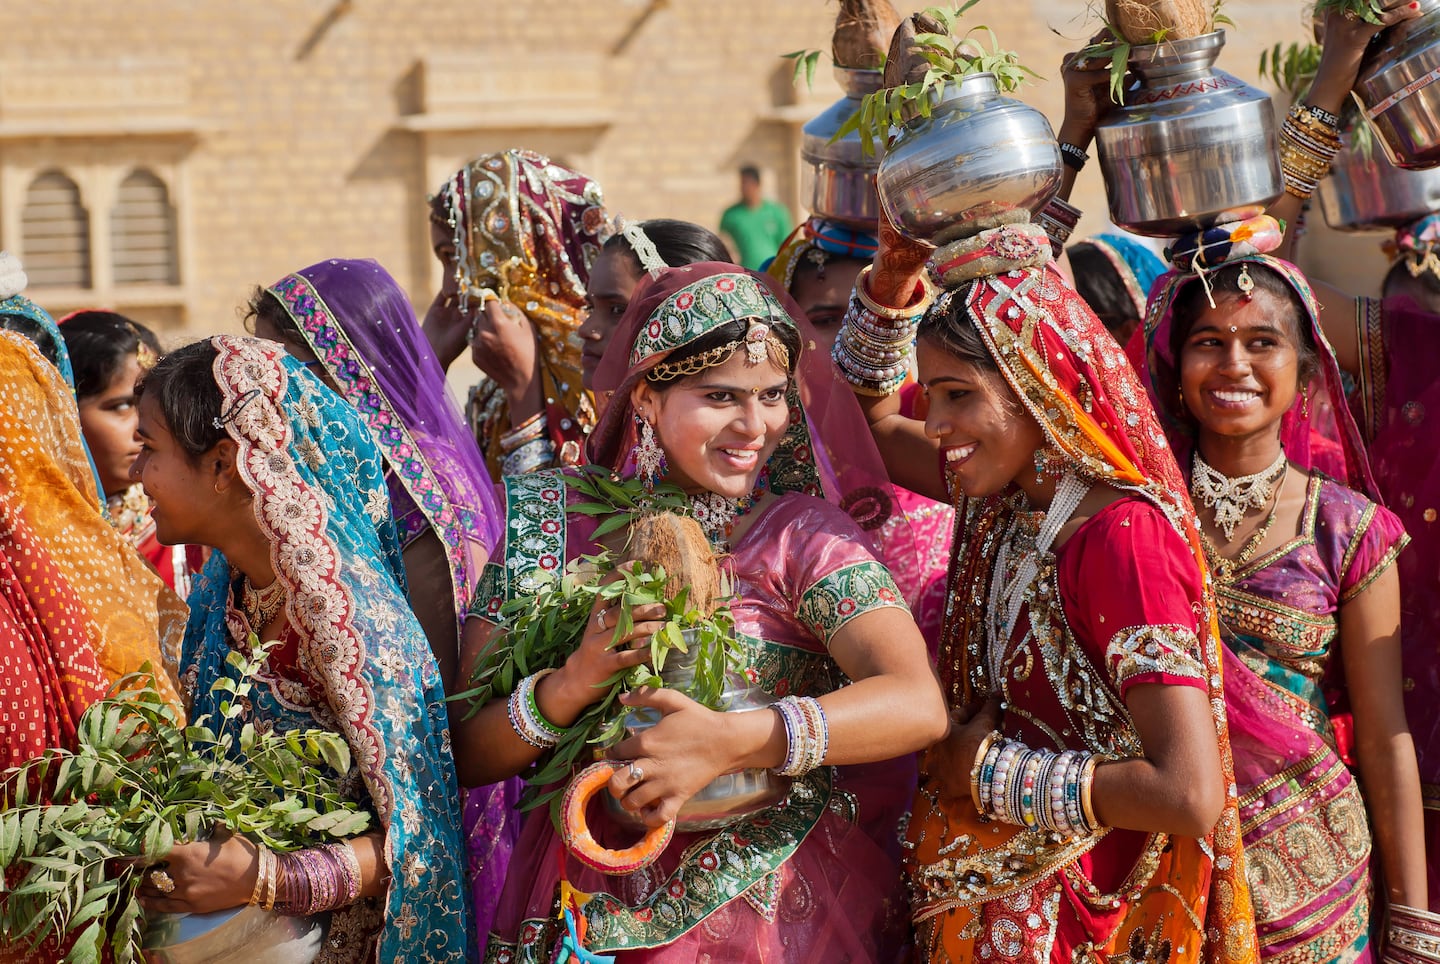 Young women dressed in traditional indian sari at the Desert Festival on March 1, 2015. Shutterstock.